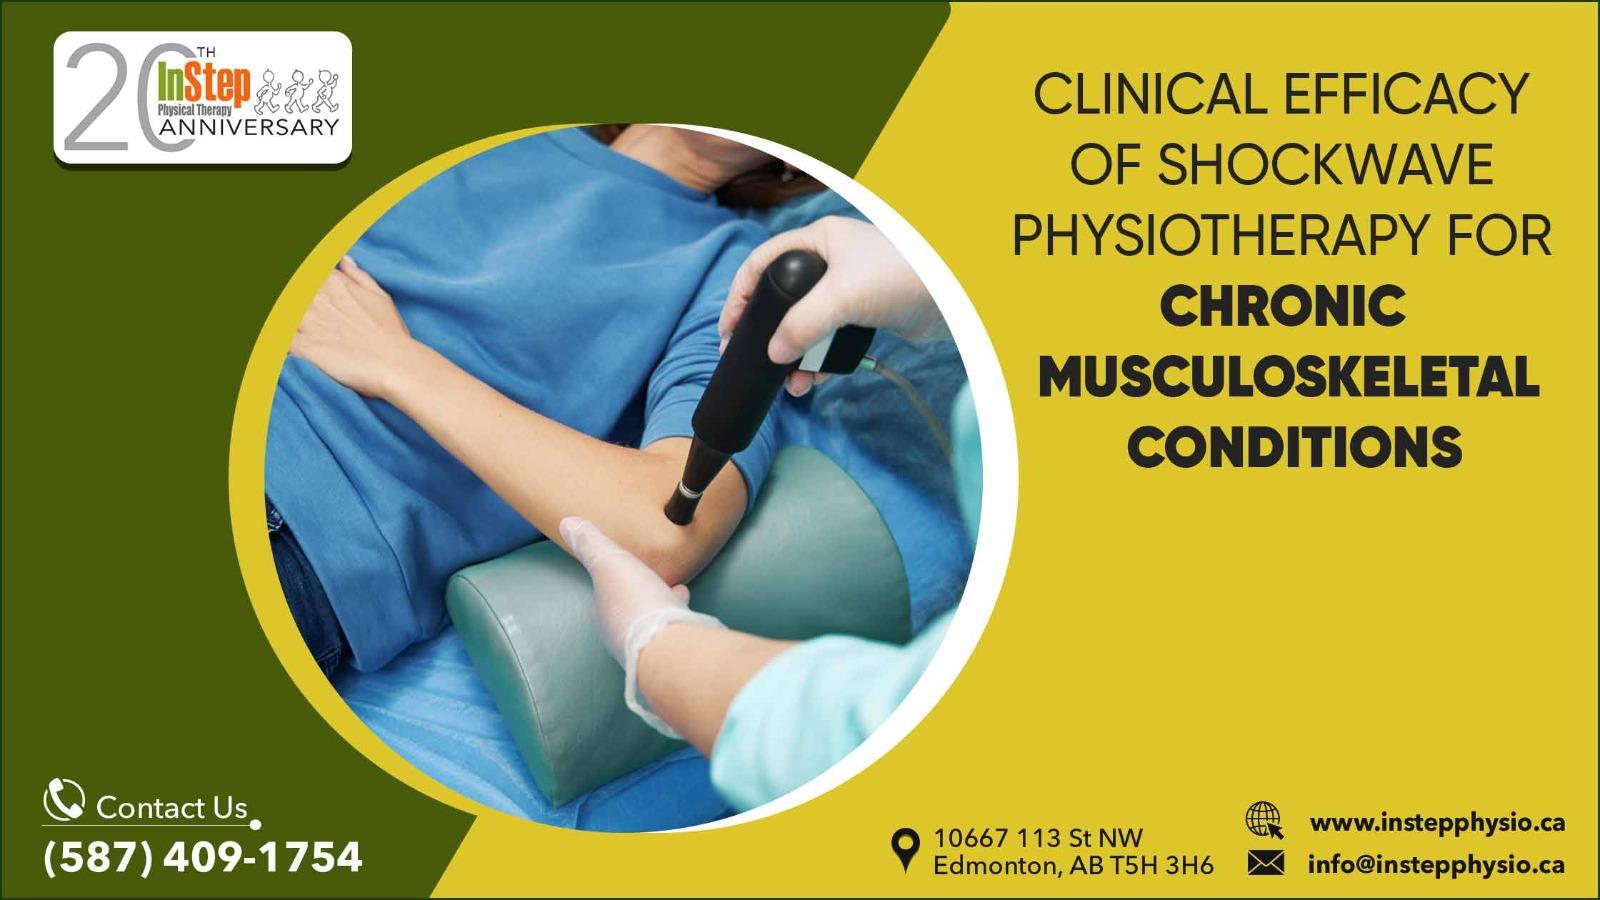 Clinical Efficacy of Shockwave Physiotherapy for Chronic Musculoskeletal Conditions